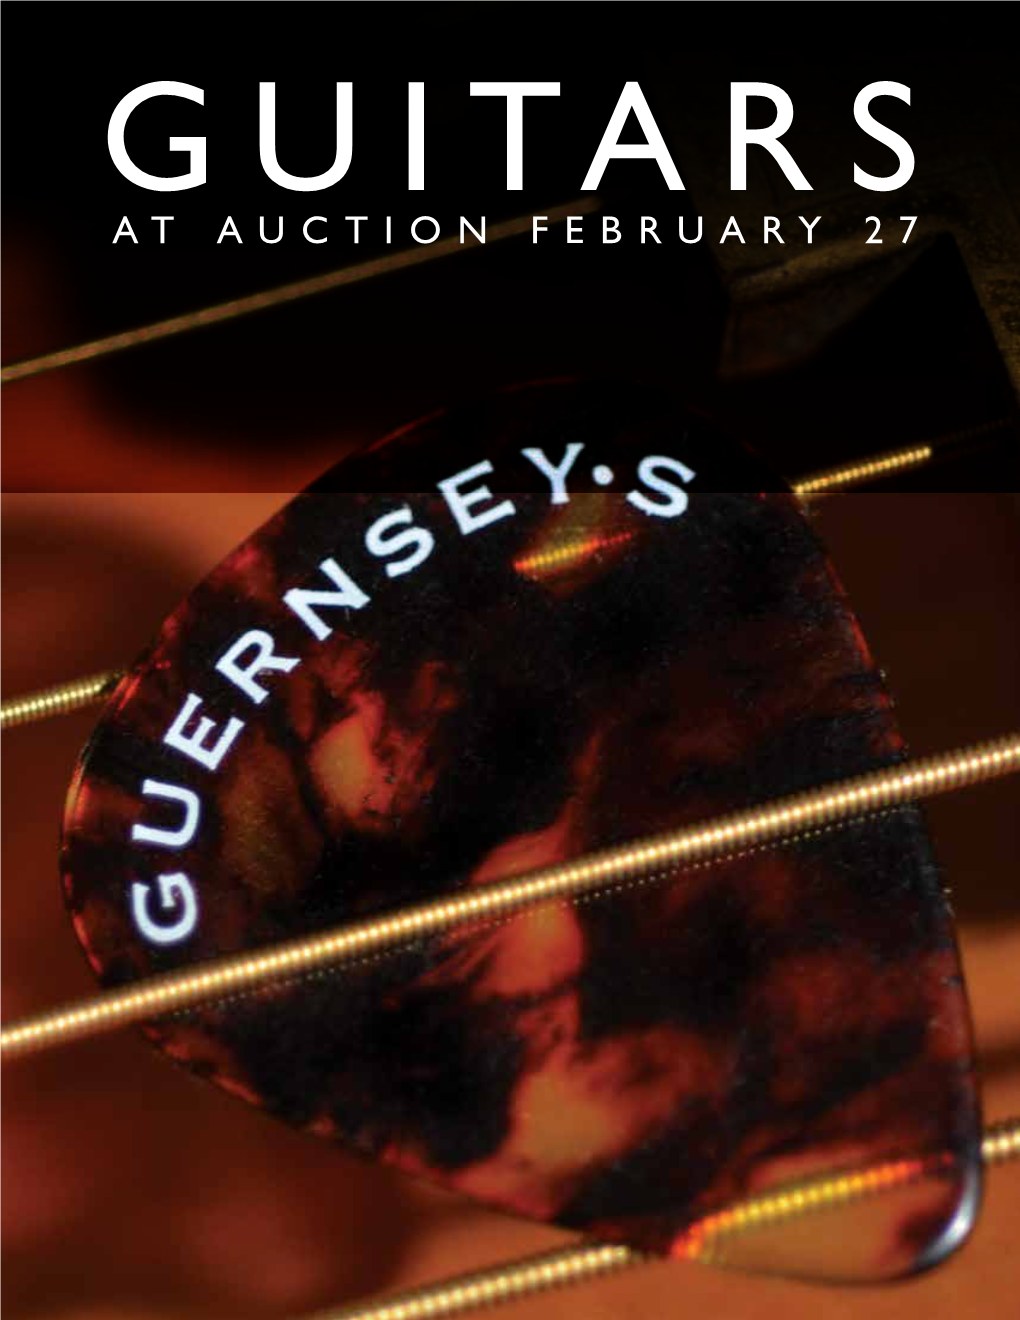 AT AUCTION FEBRUARY 27 Dear Guitar Collector